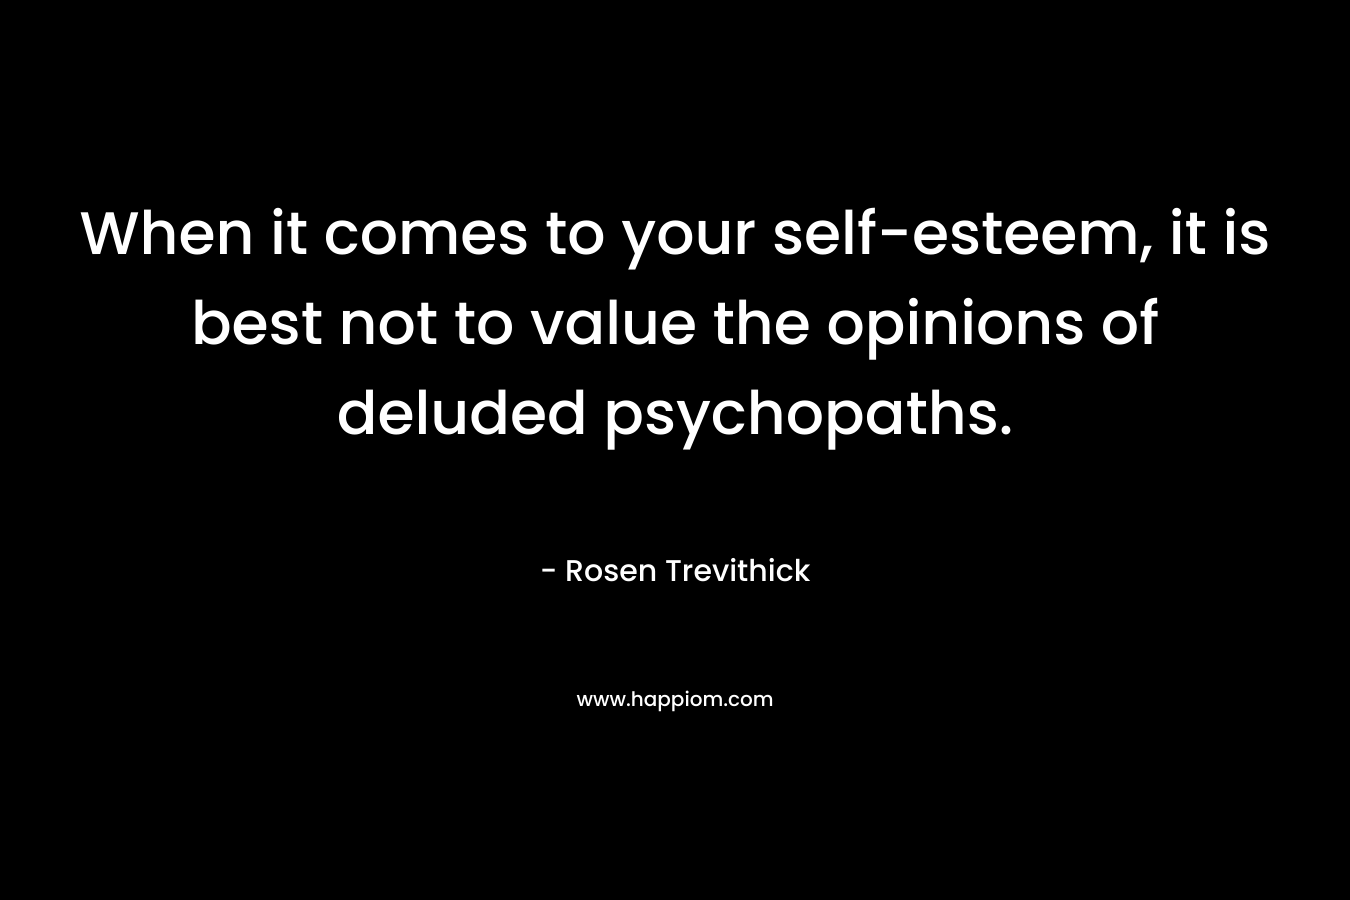 When it comes to your self-esteem, it is best not to value the opinions of deluded psychopaths. – Rosen Trevithick